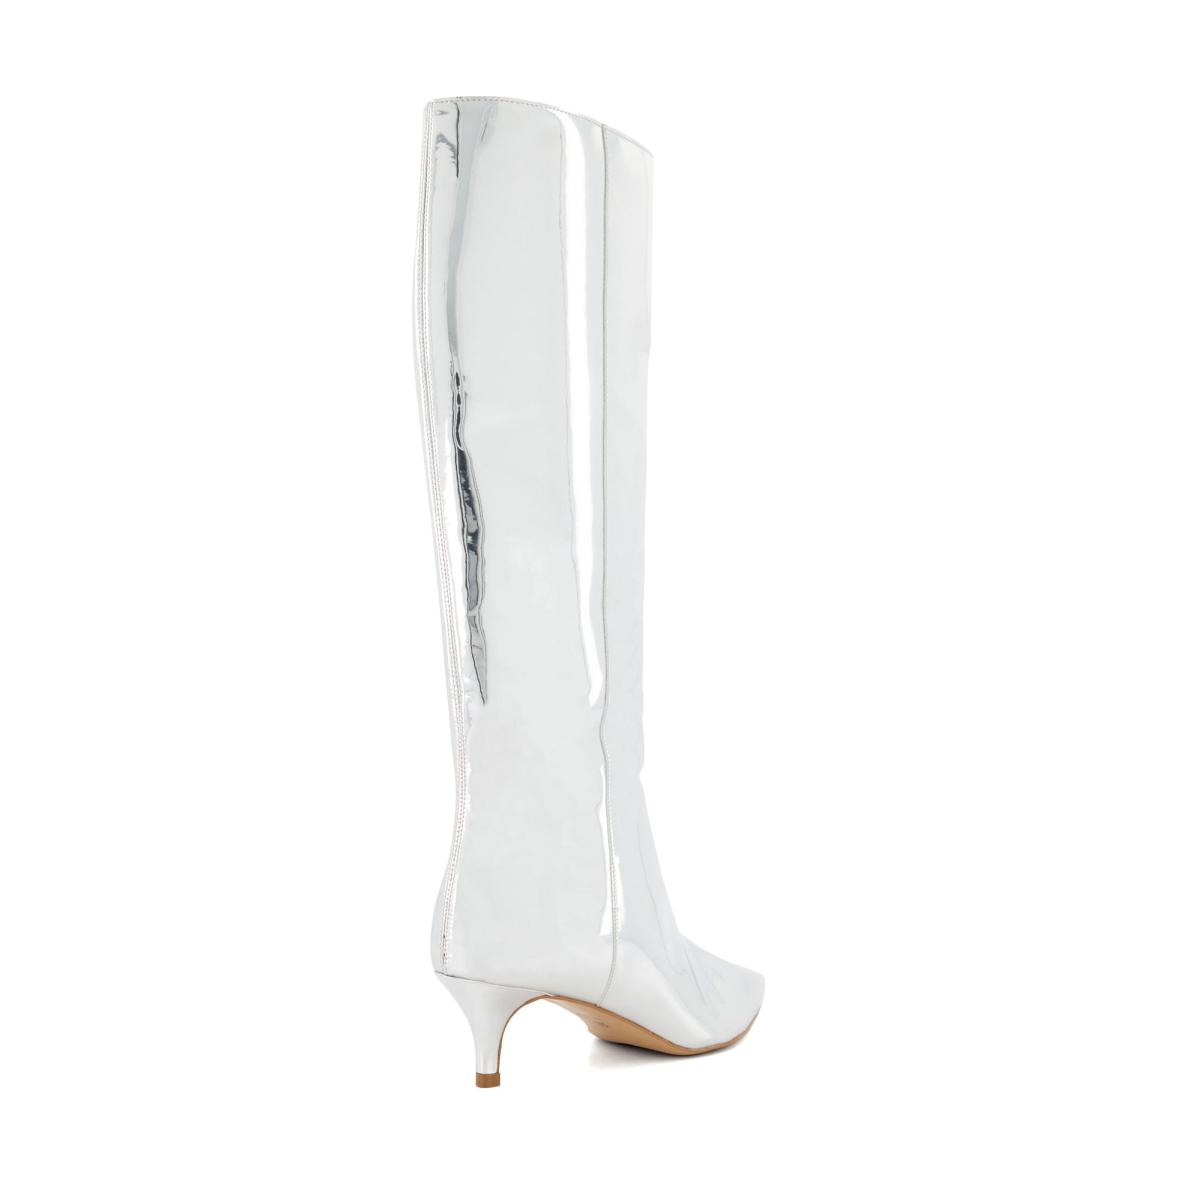 Smooth - Silver Dune London Knee High Boots Women - 1